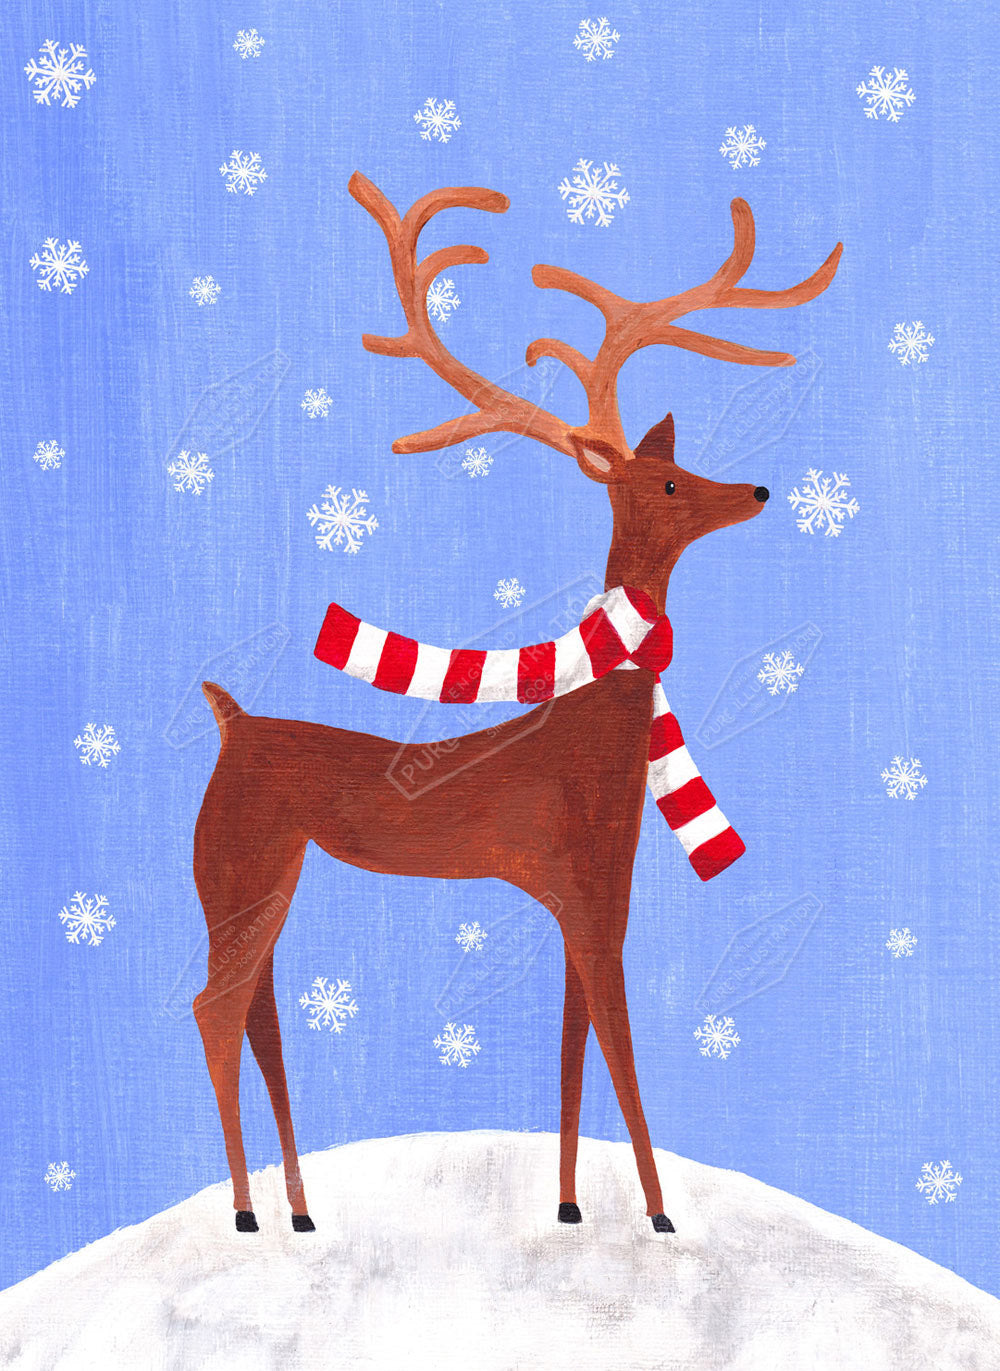 00019778SSN- Sian Summerhayes is represented by Pure Art Licensing Agency - Christmas Greeting Card Design